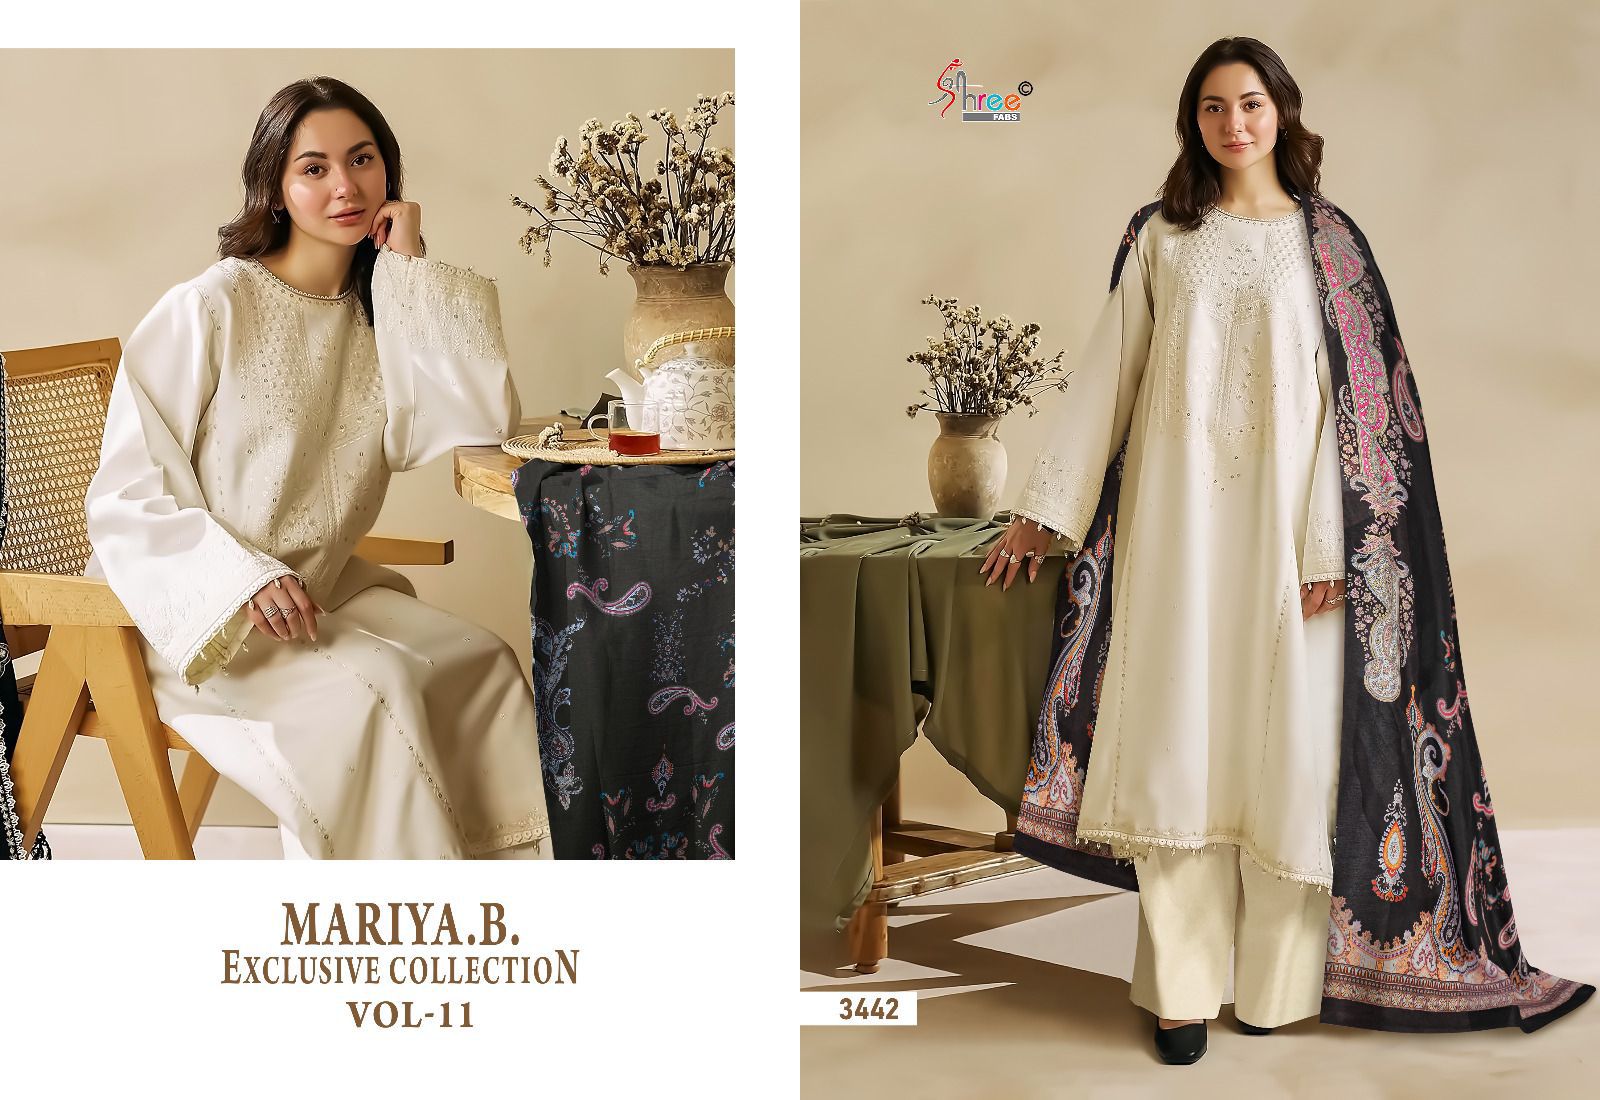 Shree Maria B Exclusive Collection Vol 11 collection 8